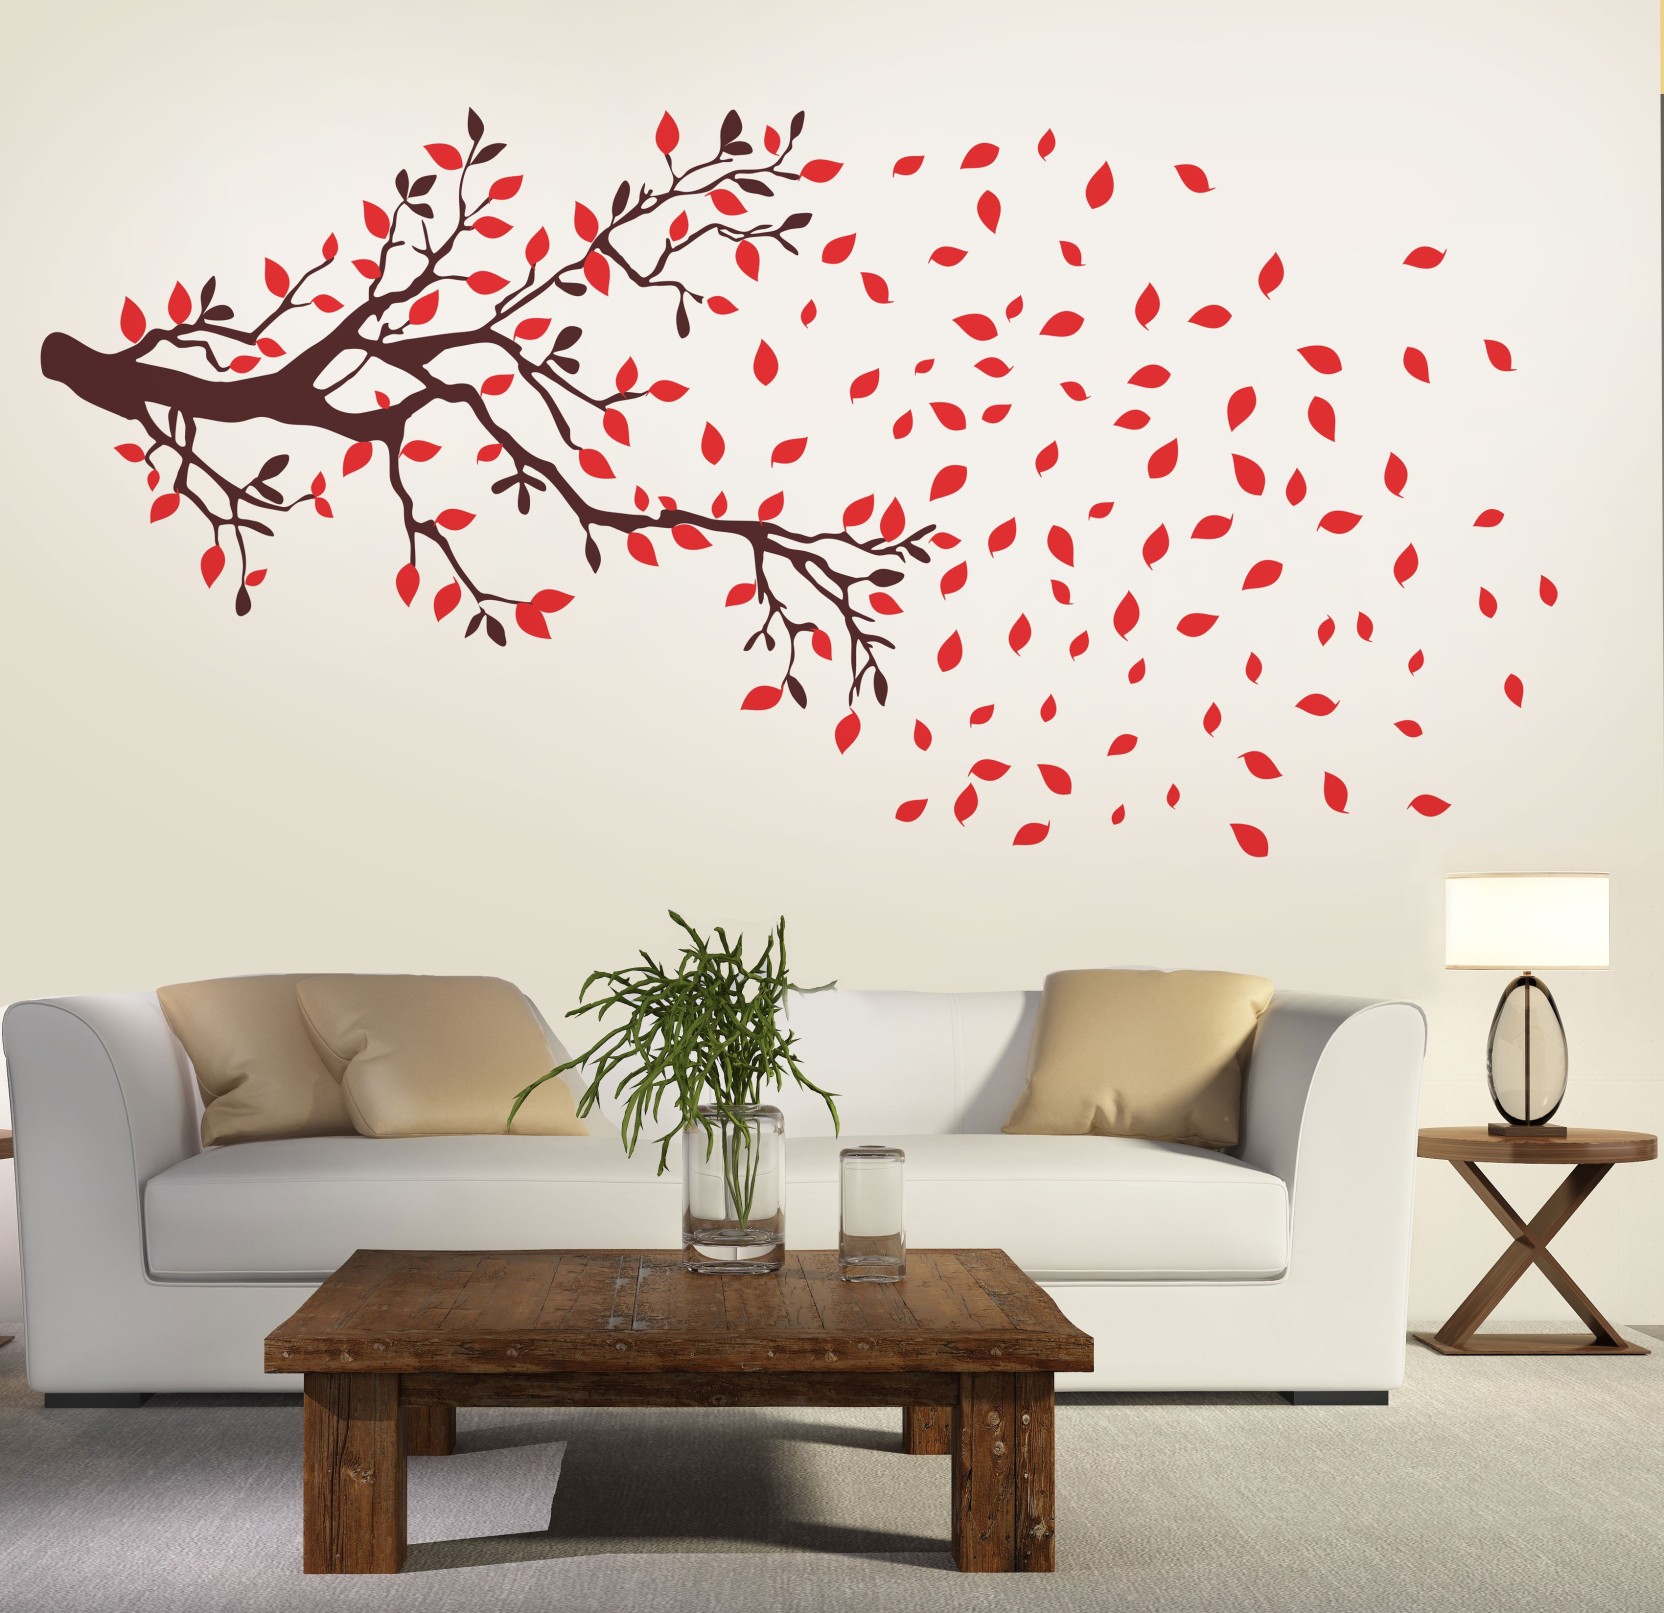 wallpaper for bedroom walls india,wall sticker,branch,leaf,wall,tree